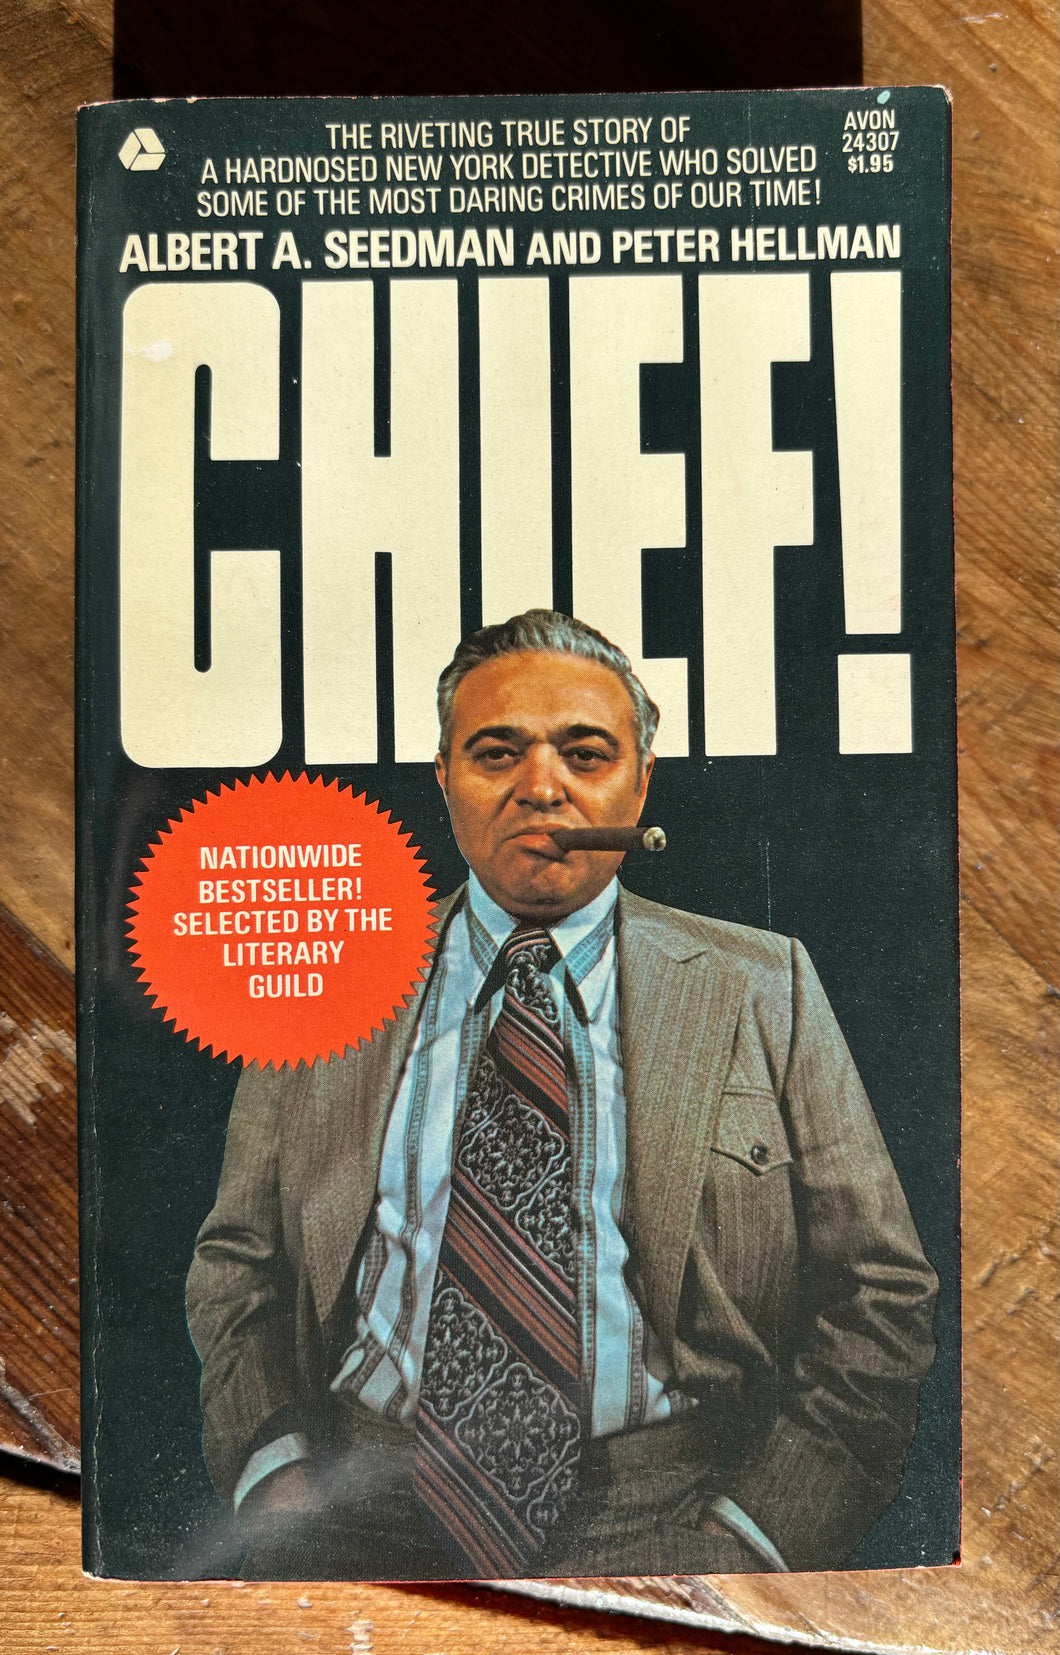 Chief!: Classic Cases from the Files of the Chief of Detectives